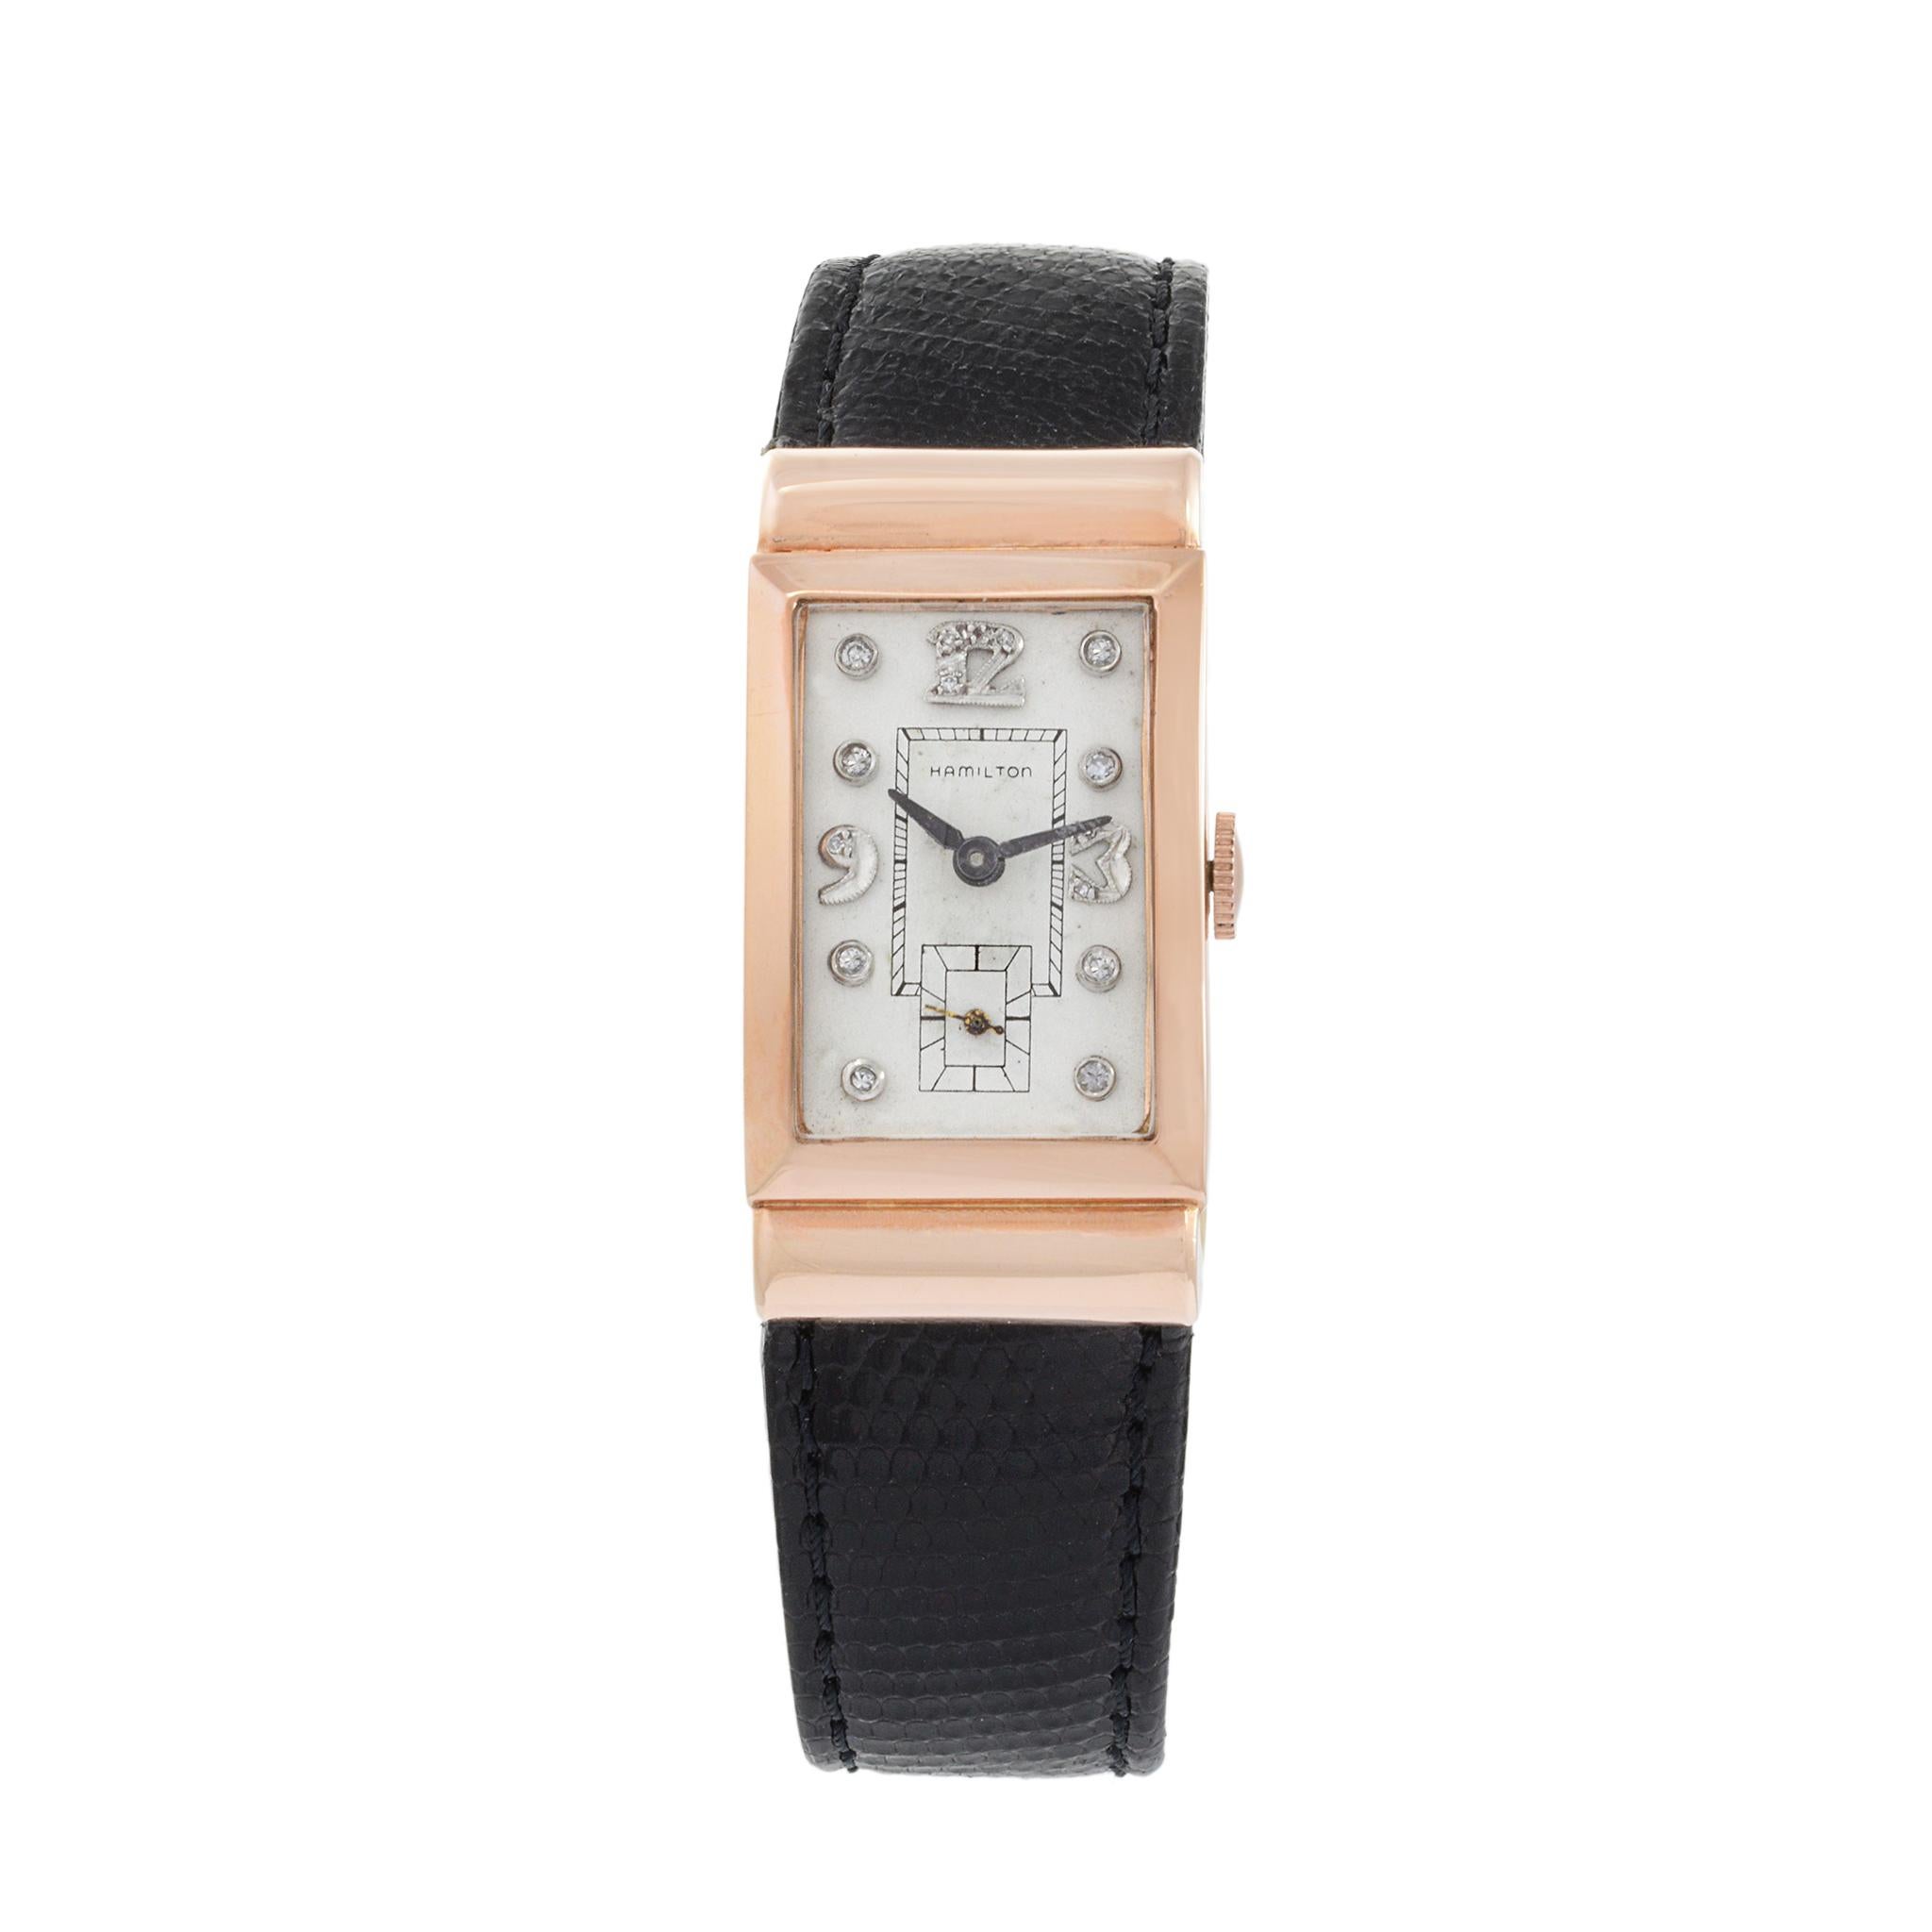 This is a rare 1950's Hamilton 14k rose gold hooded lug tank watch with diamond dial. This tank is large for the period at 21mm in diameter and 40mm lug to lug.

This watch is powered by a Hamilton caliber 982 19 jewel movement. This was one of the